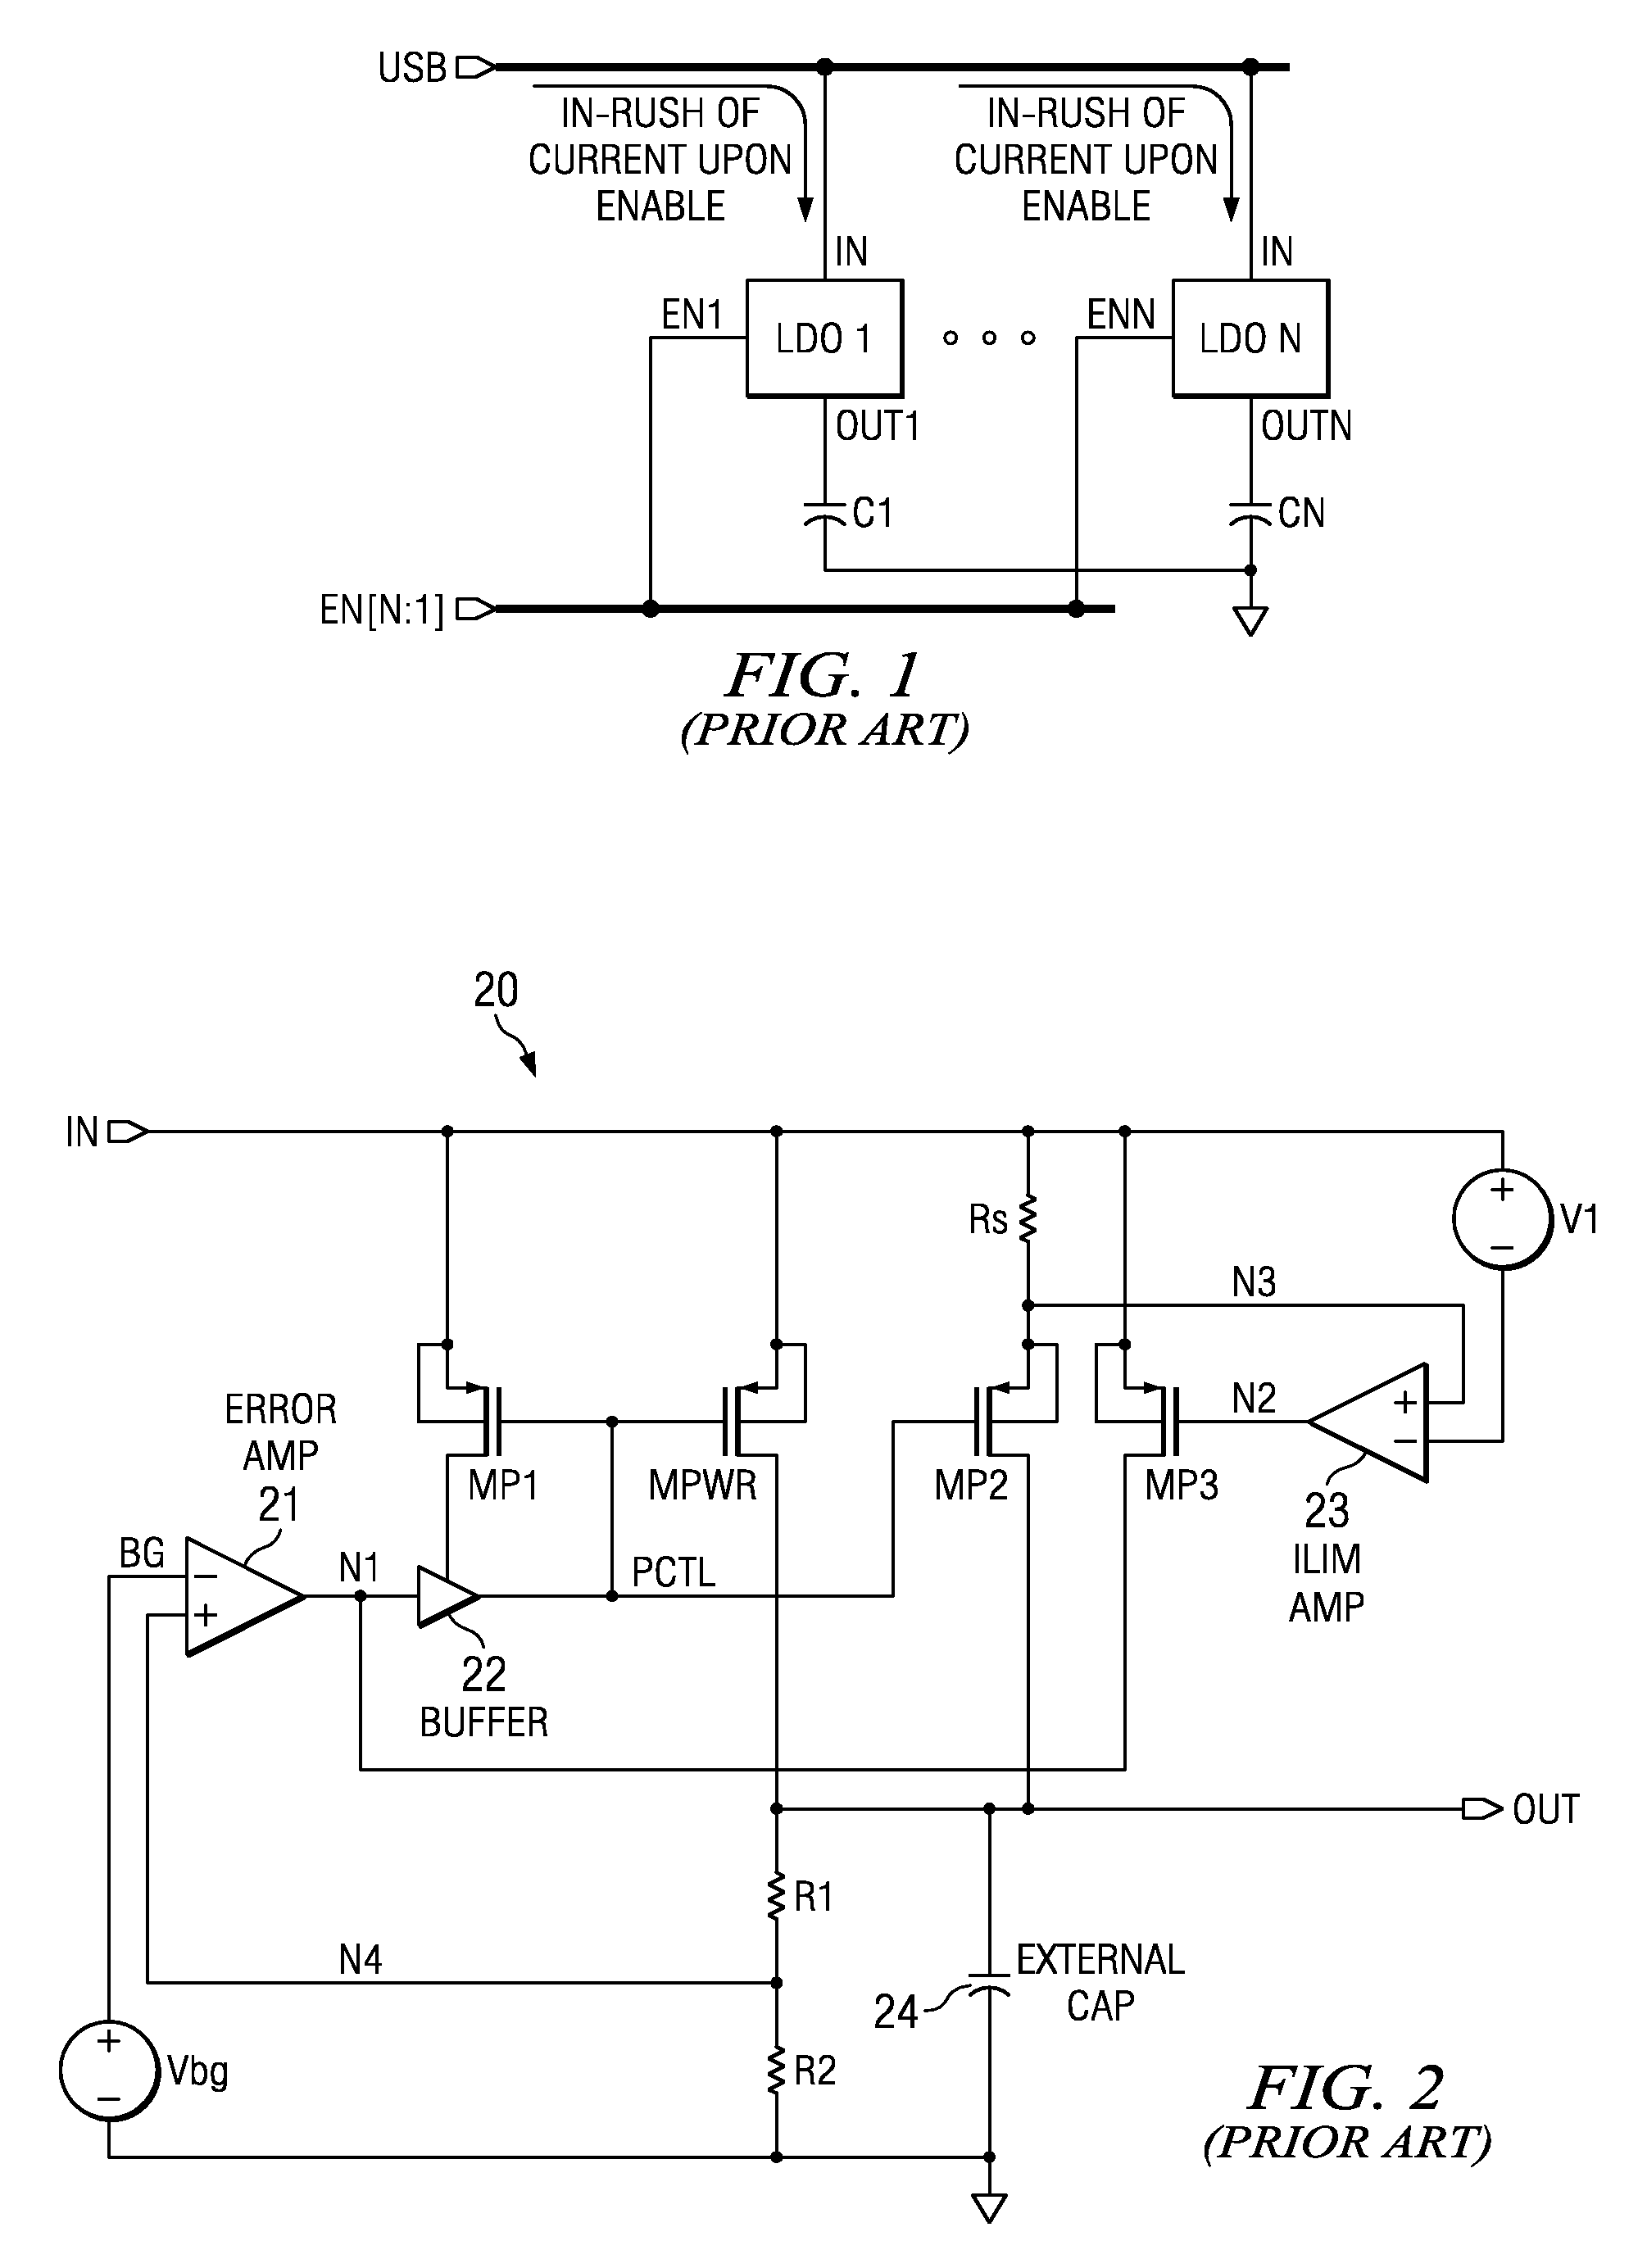 Soft-start circuit and method for low-dropout voltage regulators